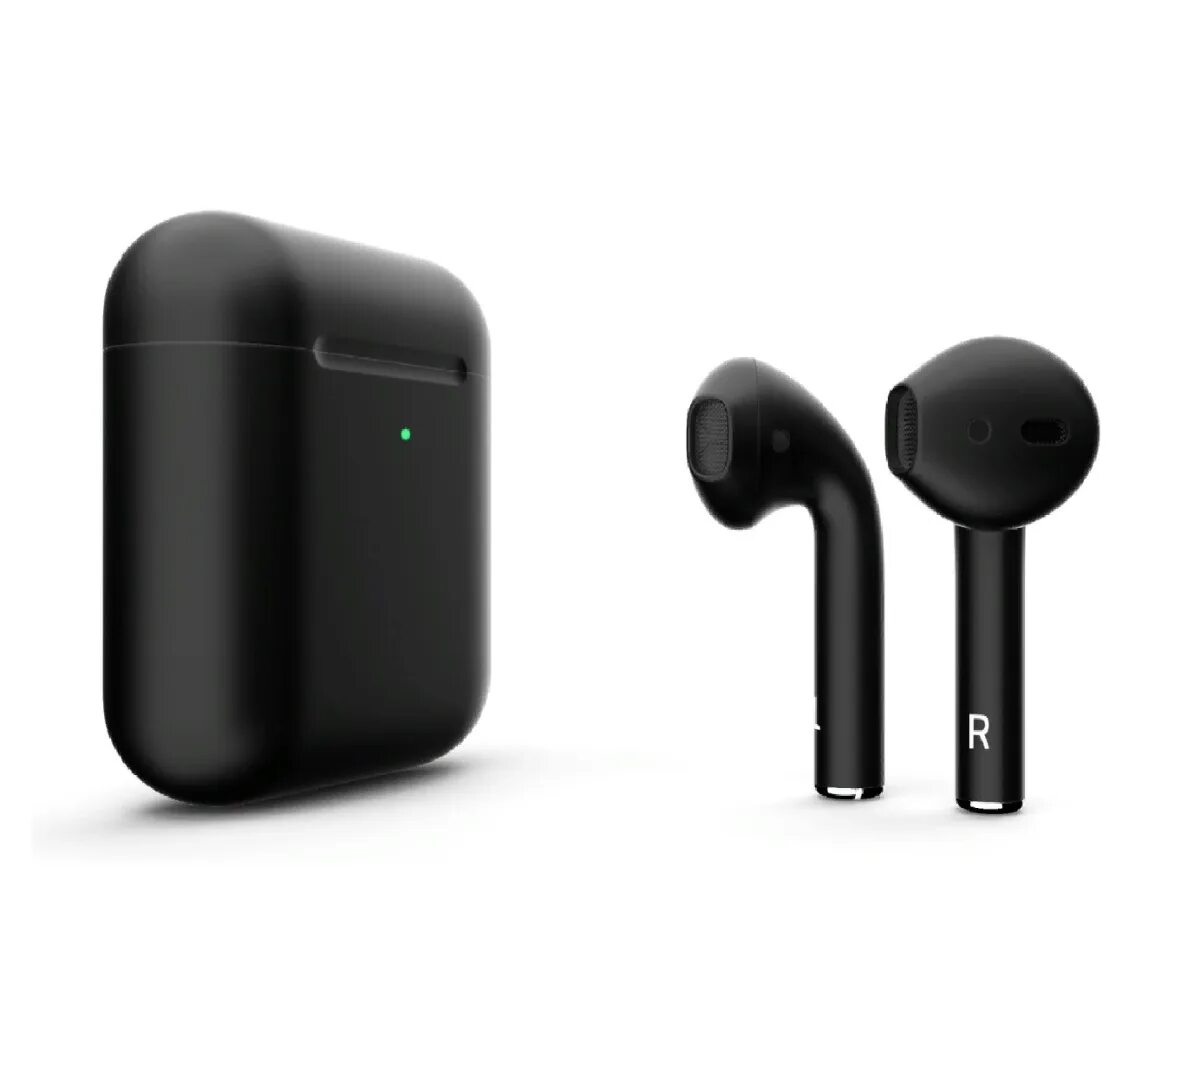 Jbl airpods. Apple AIRPODS 2. Наушники беспроводные Apple AIRPODS. Беспроводные наушники Apple AIRPODS Pro 2. Наушники TWS Apple AIRPODS Pro.